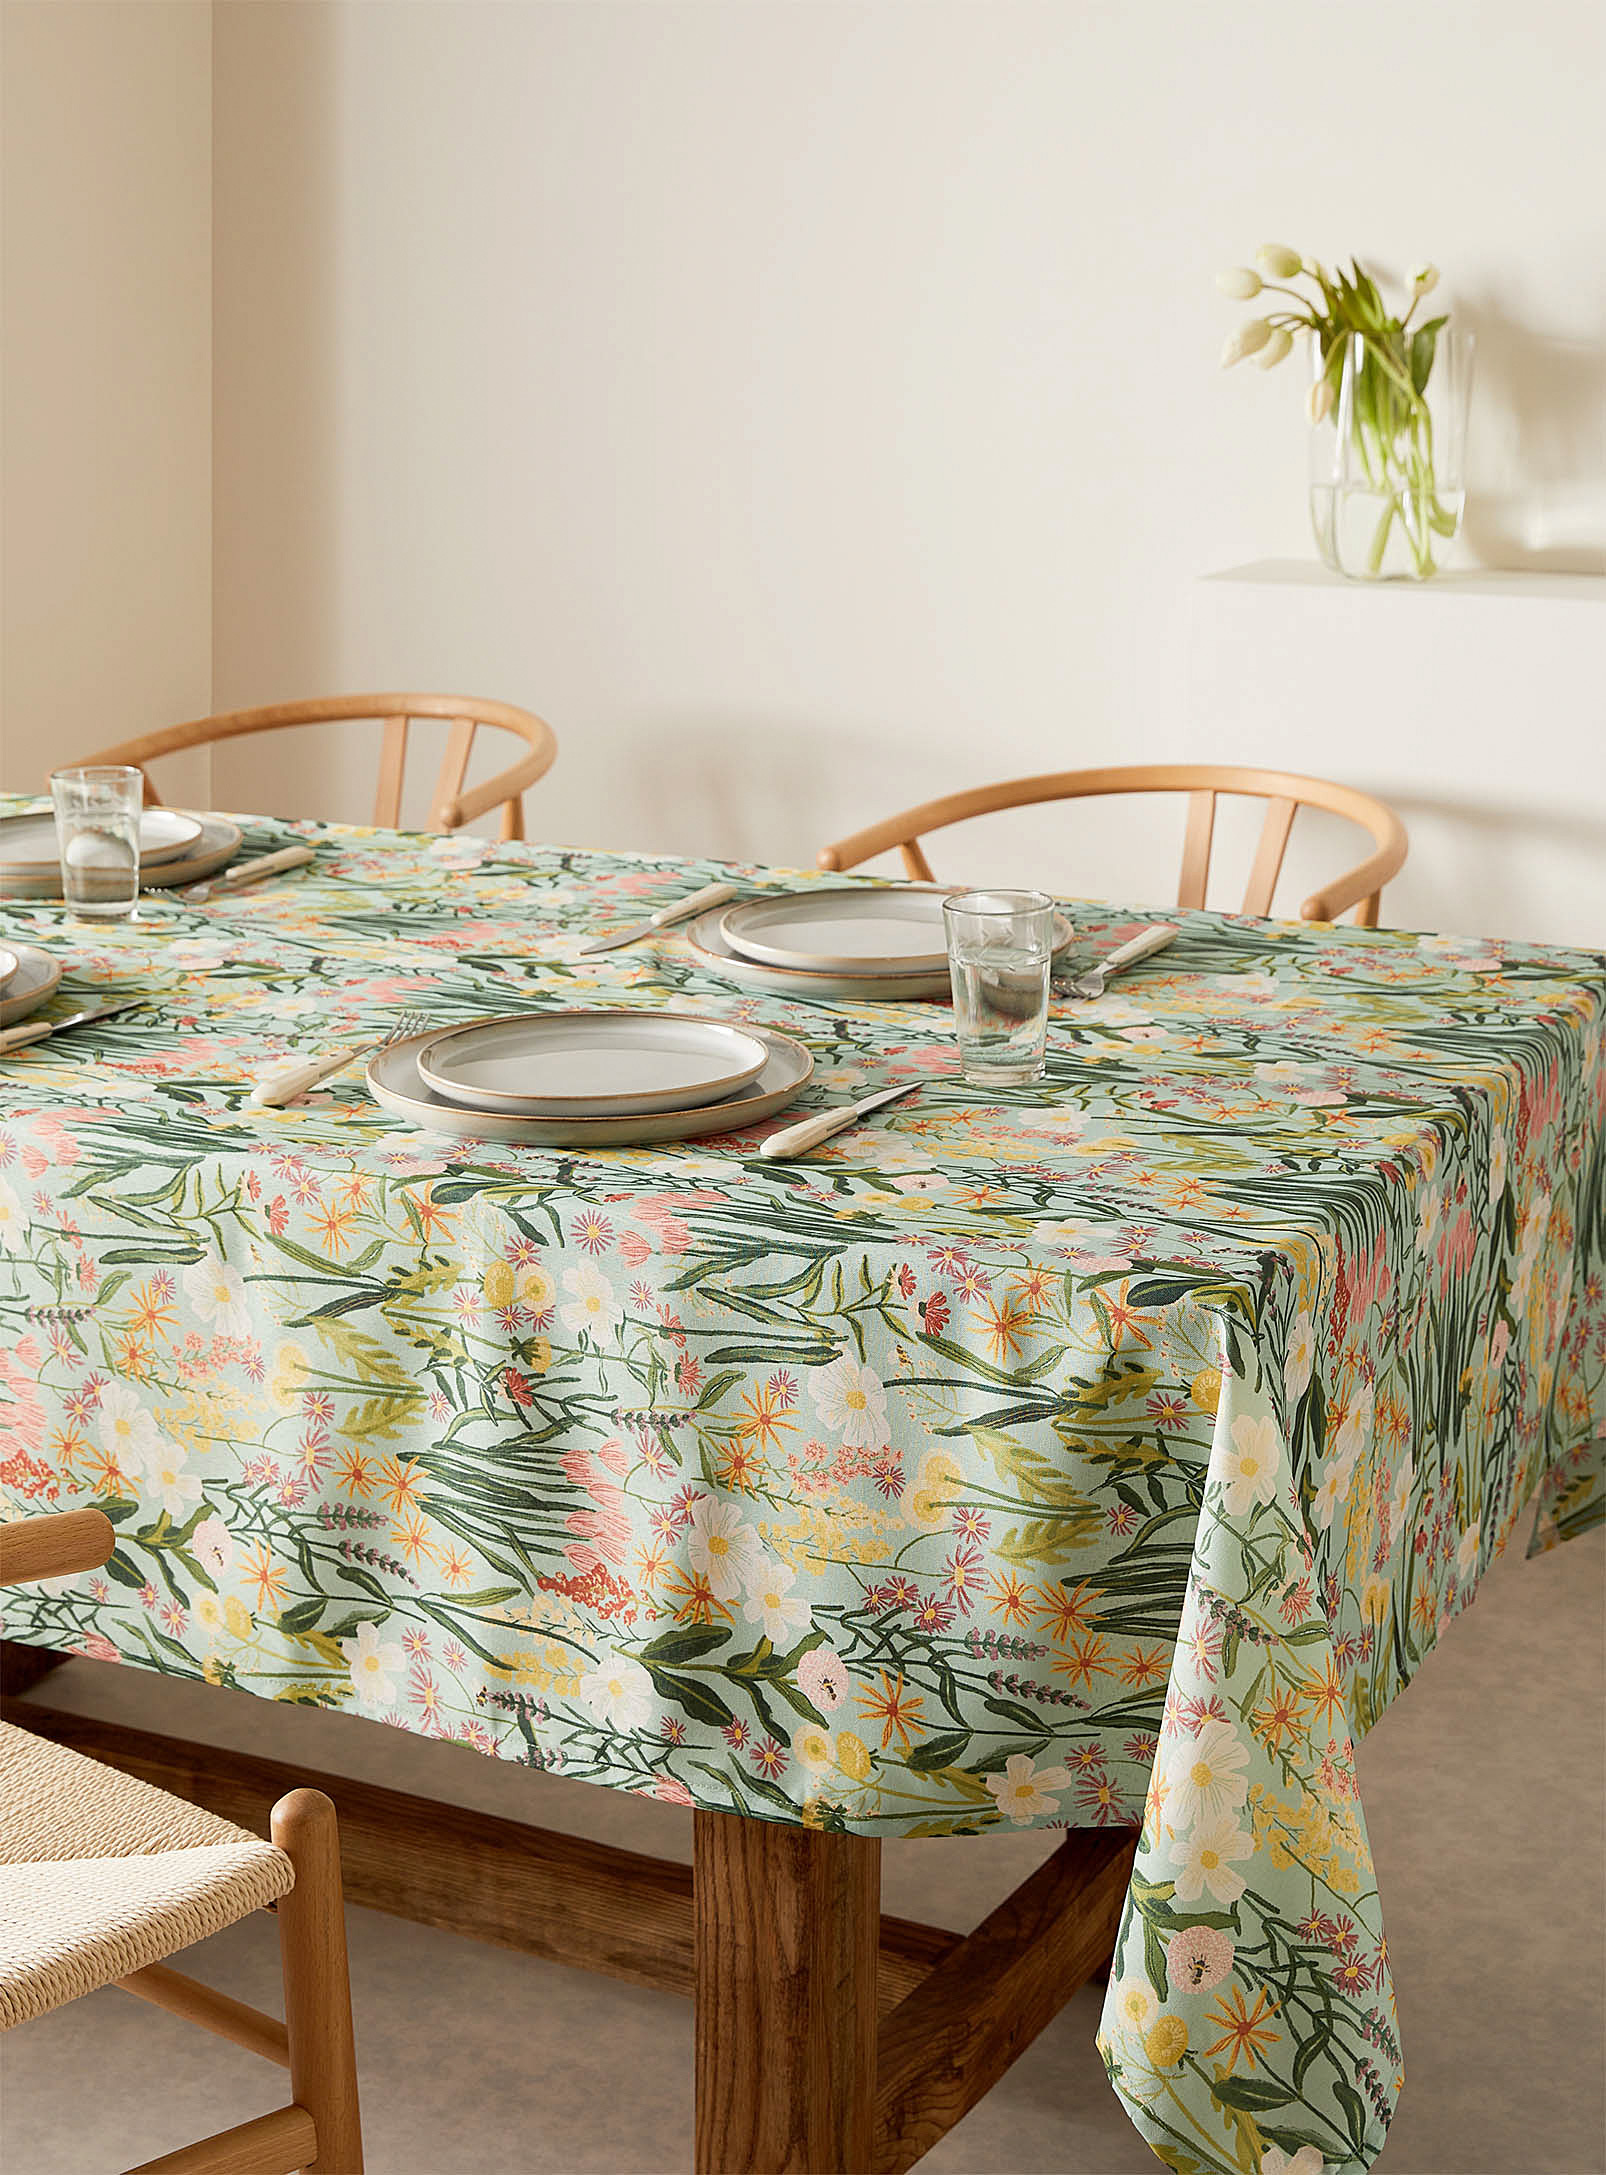 Danica - Sunny garden recycled polyester tablecloth